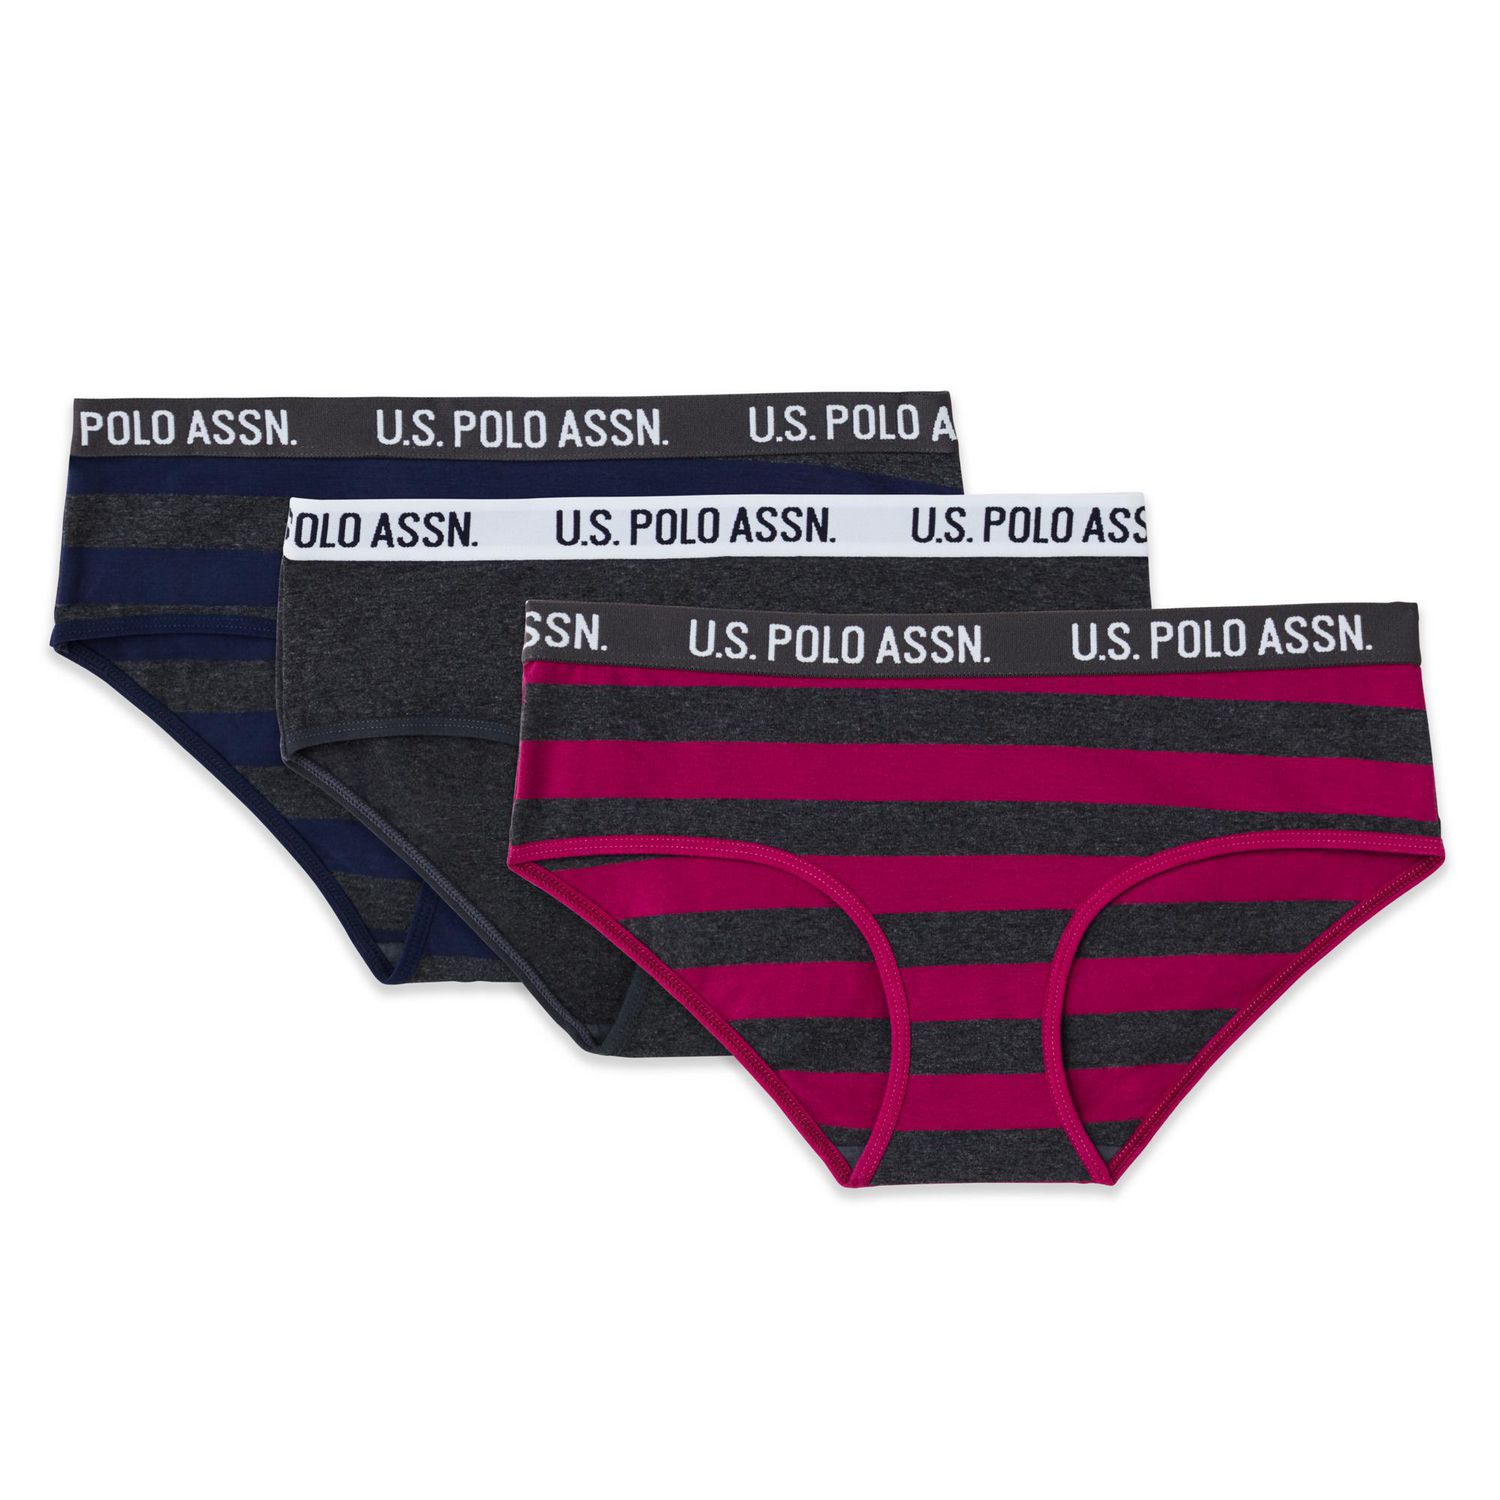 U.S. Polo Assn. Women's 3-Pack Printed Cotton Hipsters 